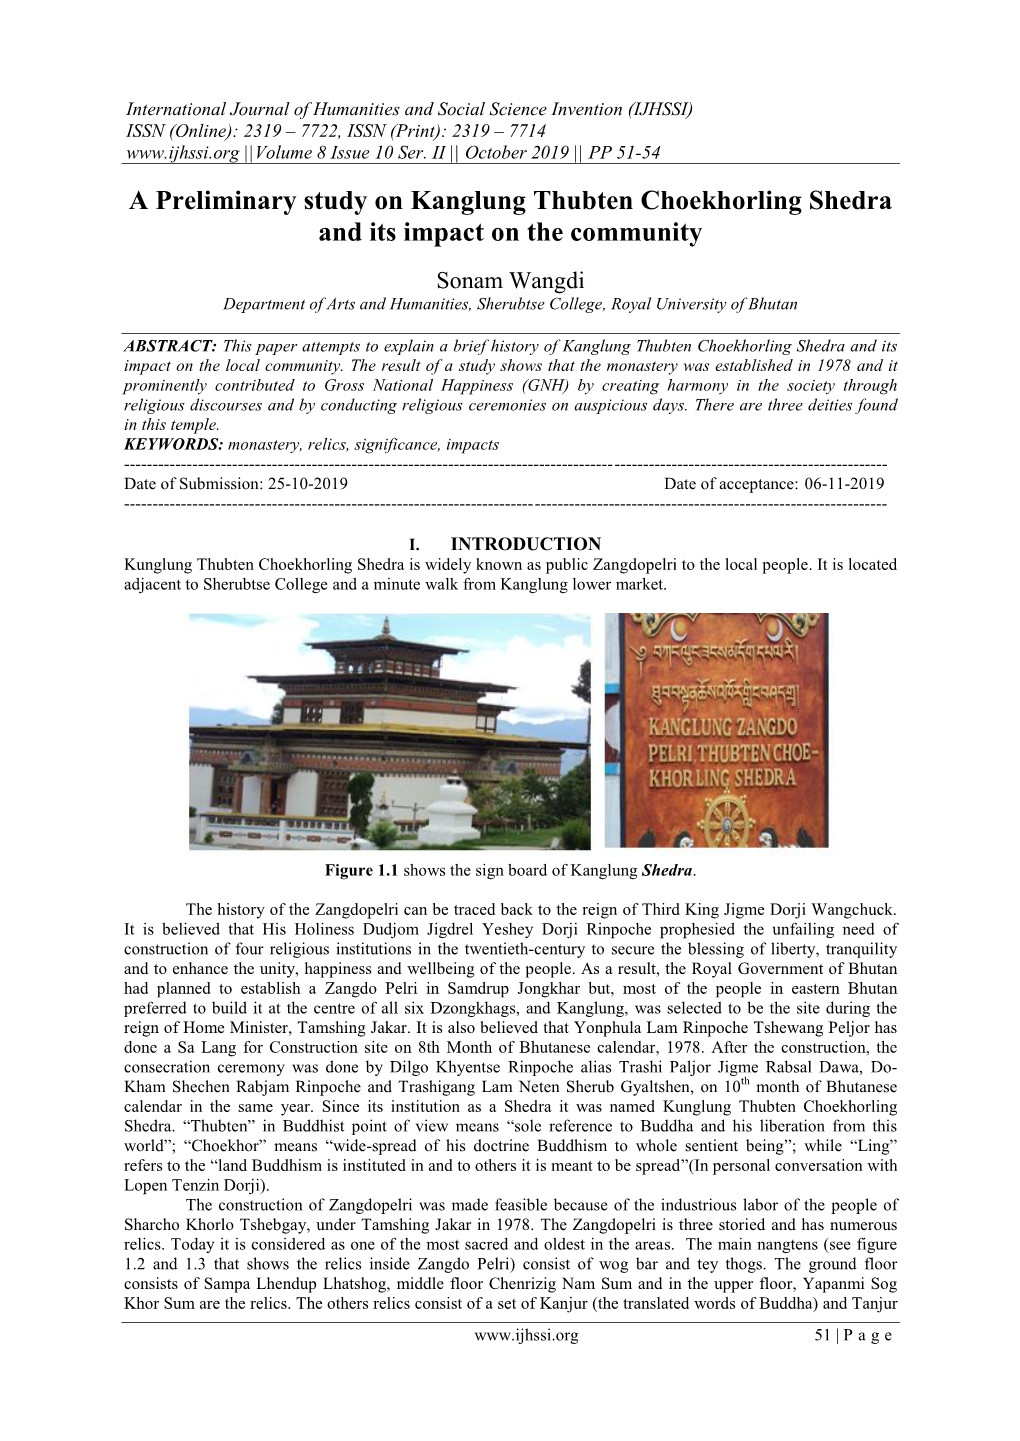 A Preliminary Study on Kanglung Thubten Choekhorling Shedra and Its Impact on the Community